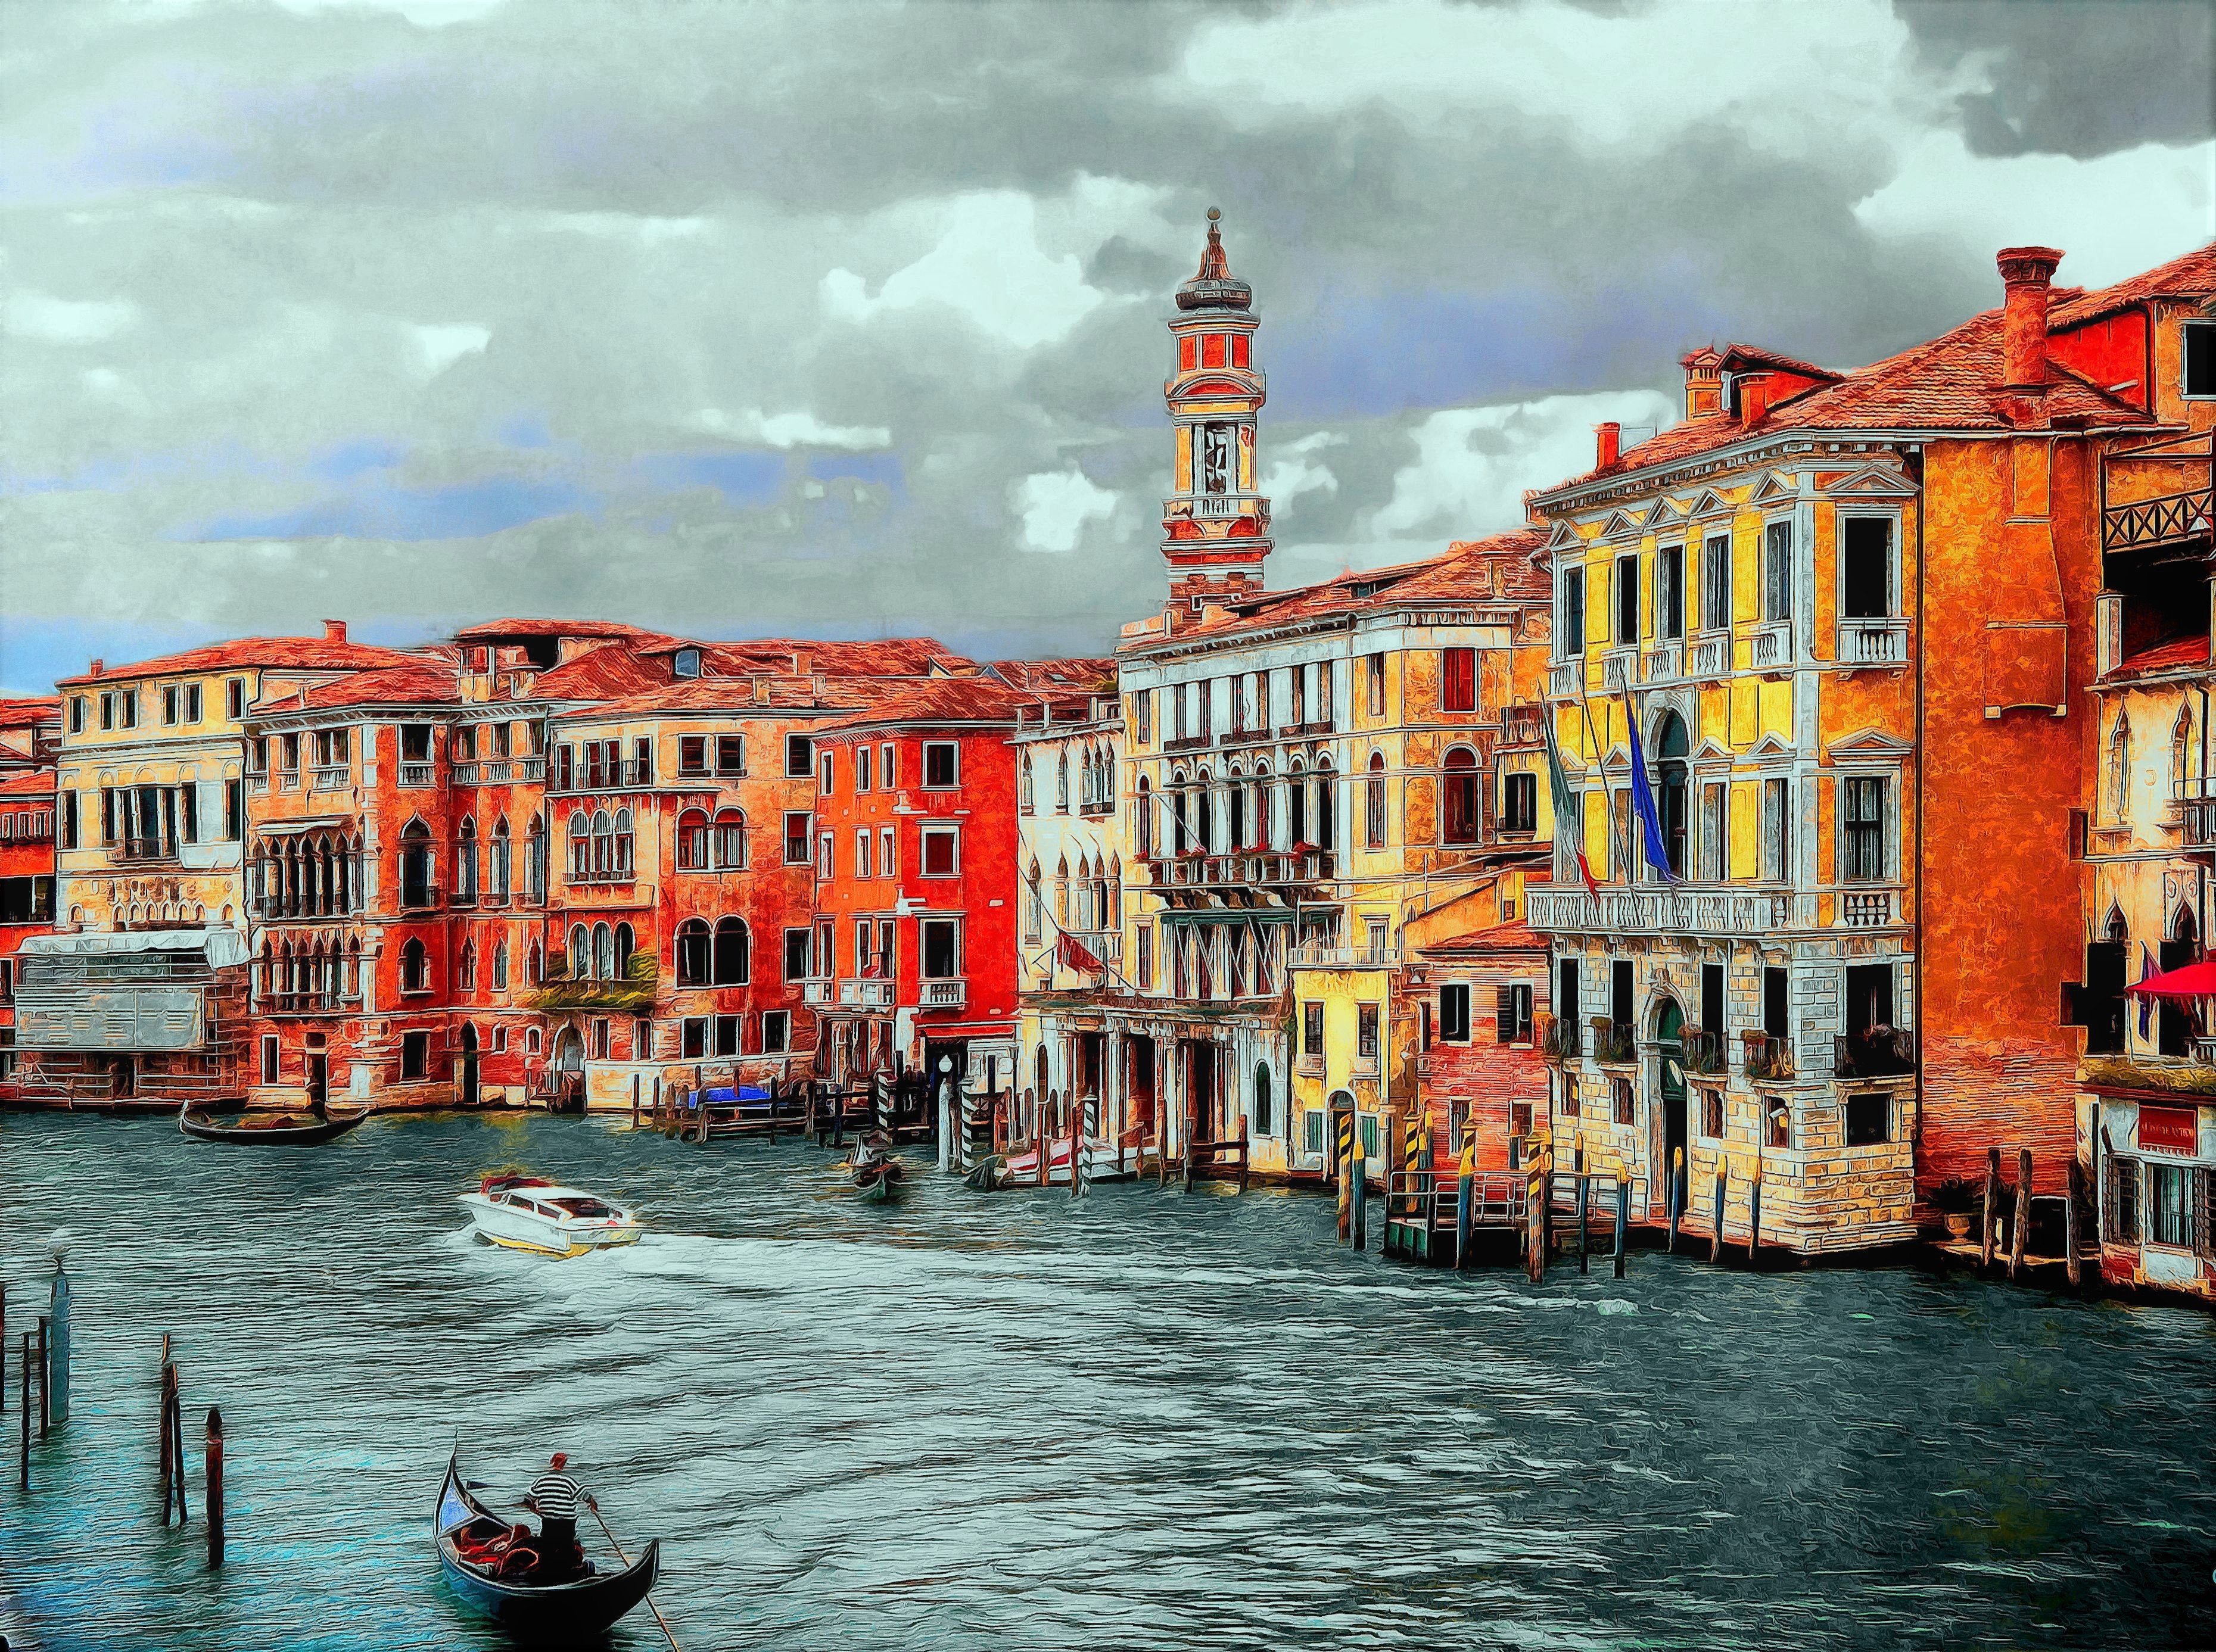 man made, venice, building, colorful, gondola, grand canal, italy, cities